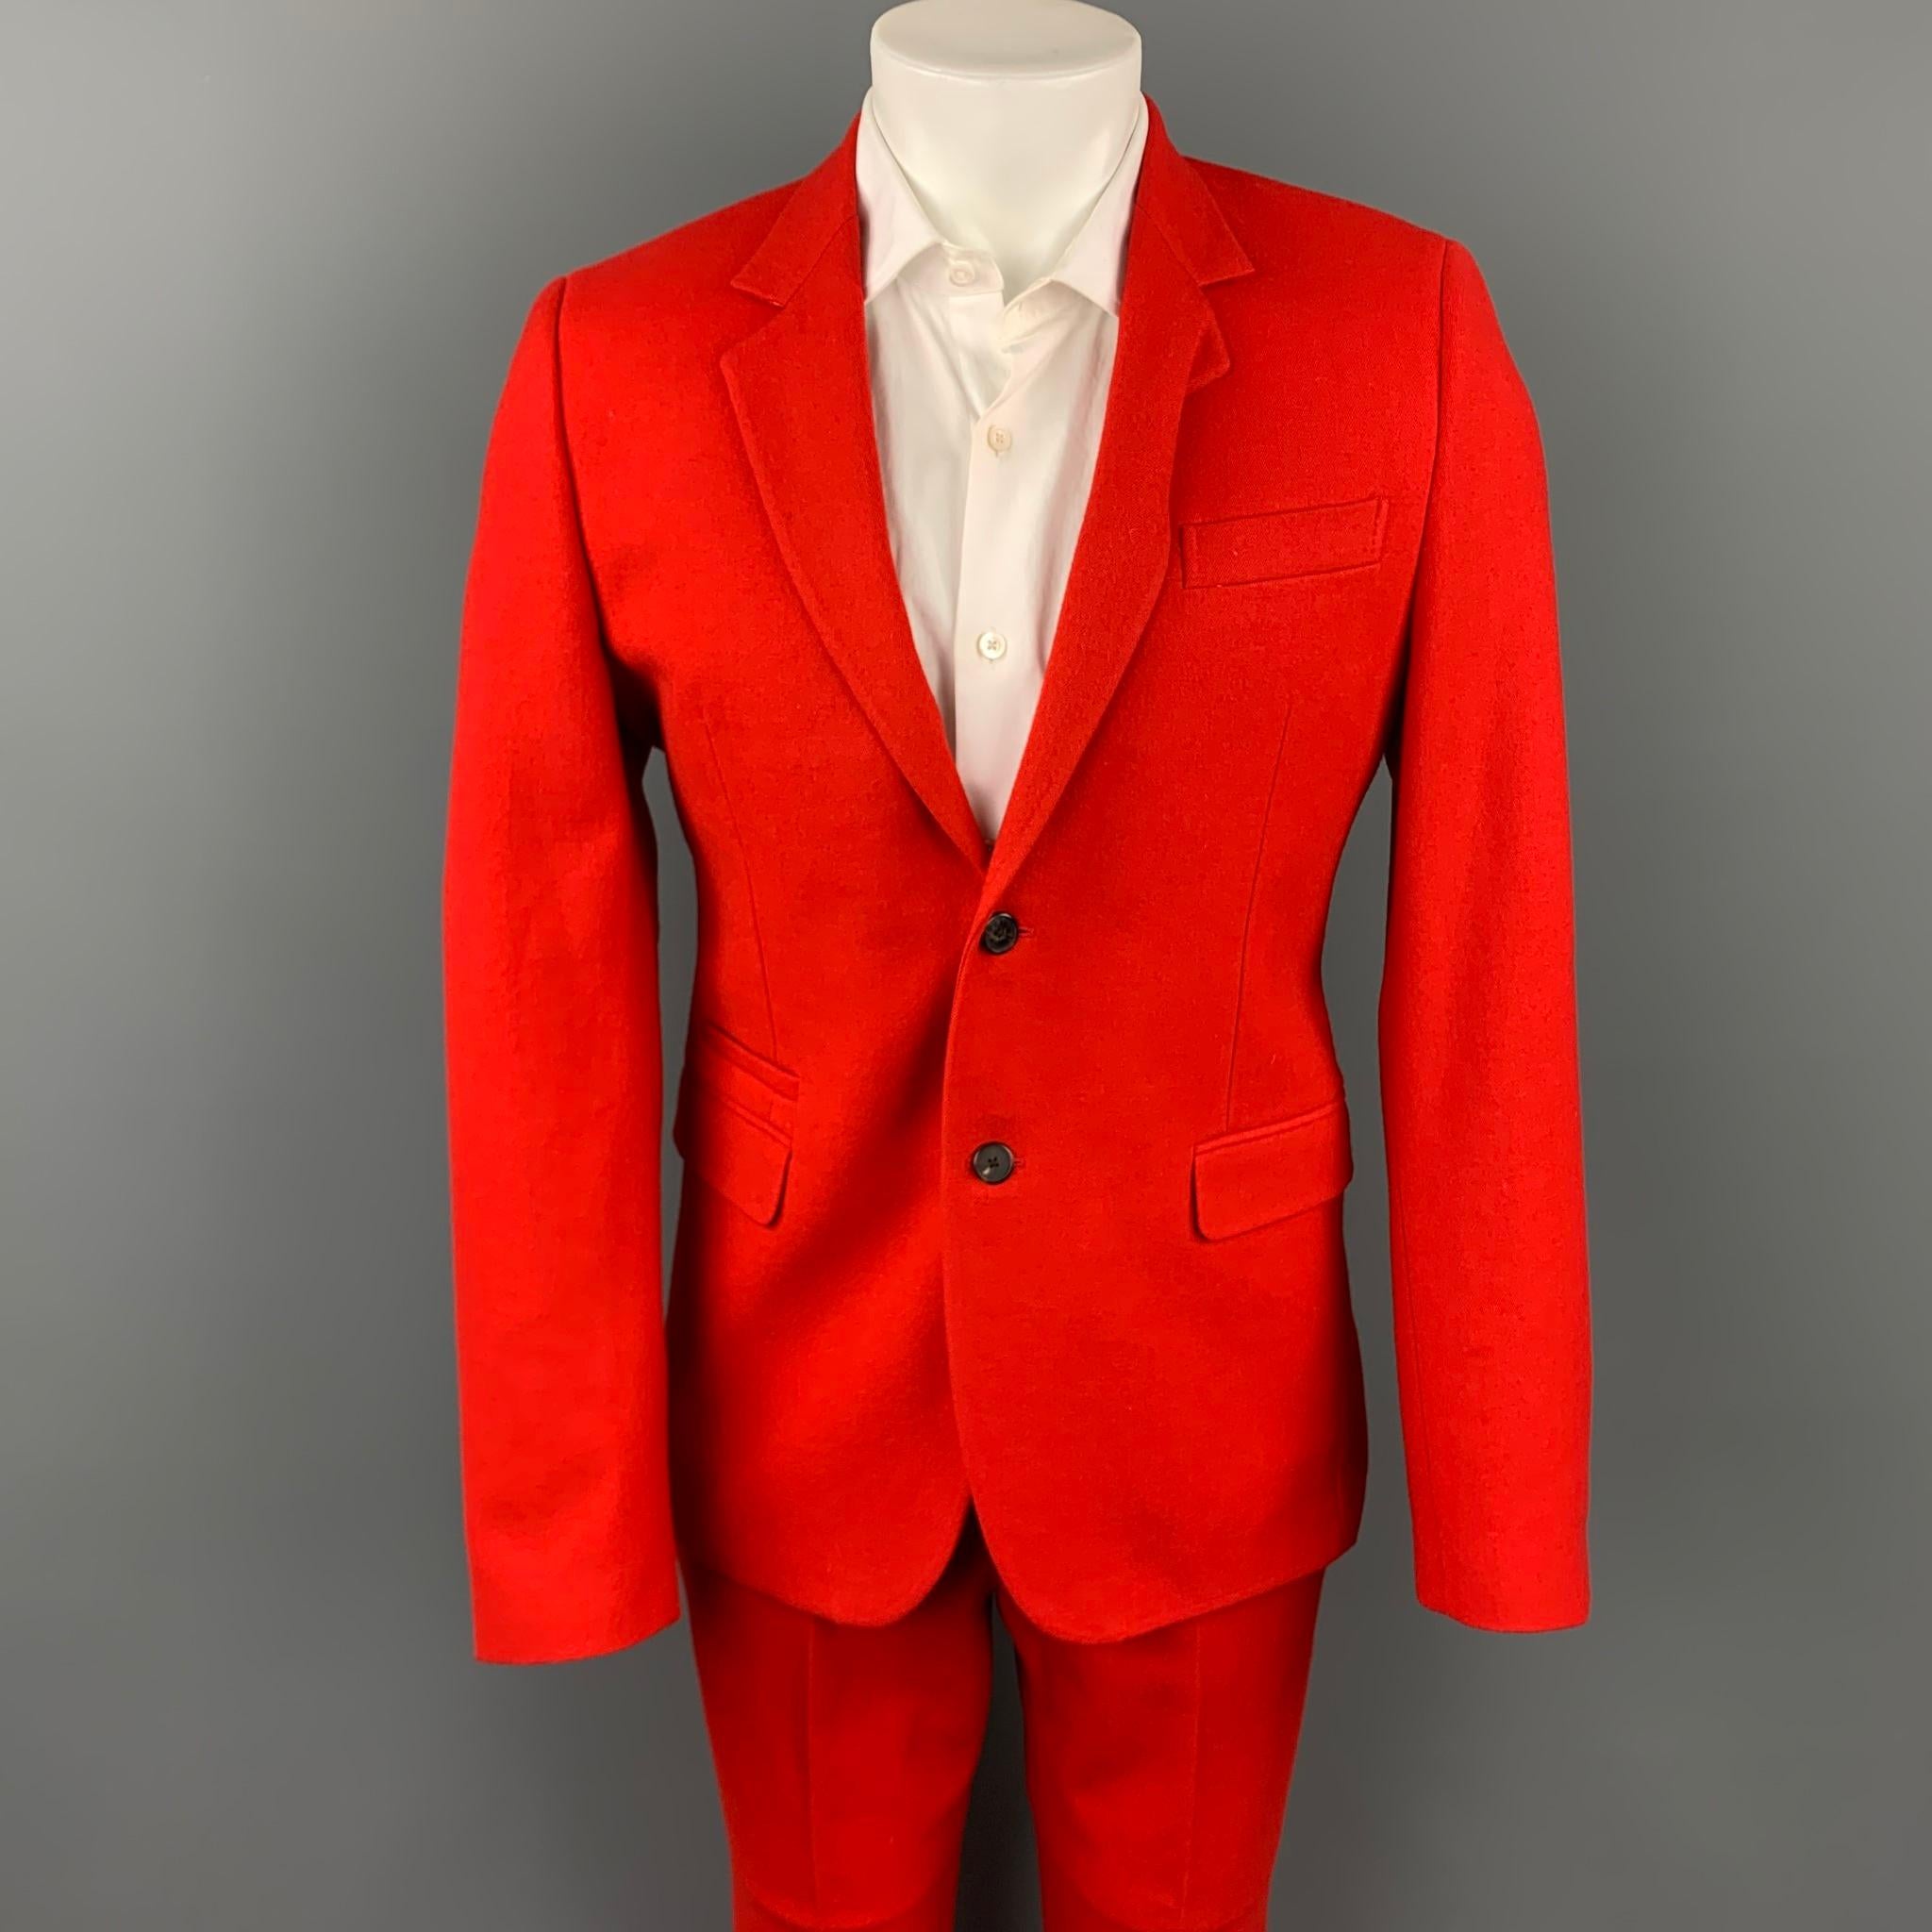 GIVENCHY suit comes in a red wool / cotton with a full liner and includes a single breasted, two button sport coat with a notch lapel and matching flat front trousers. Made in Italy.

Very Good Pre-Owned Condition.
Marked: IT